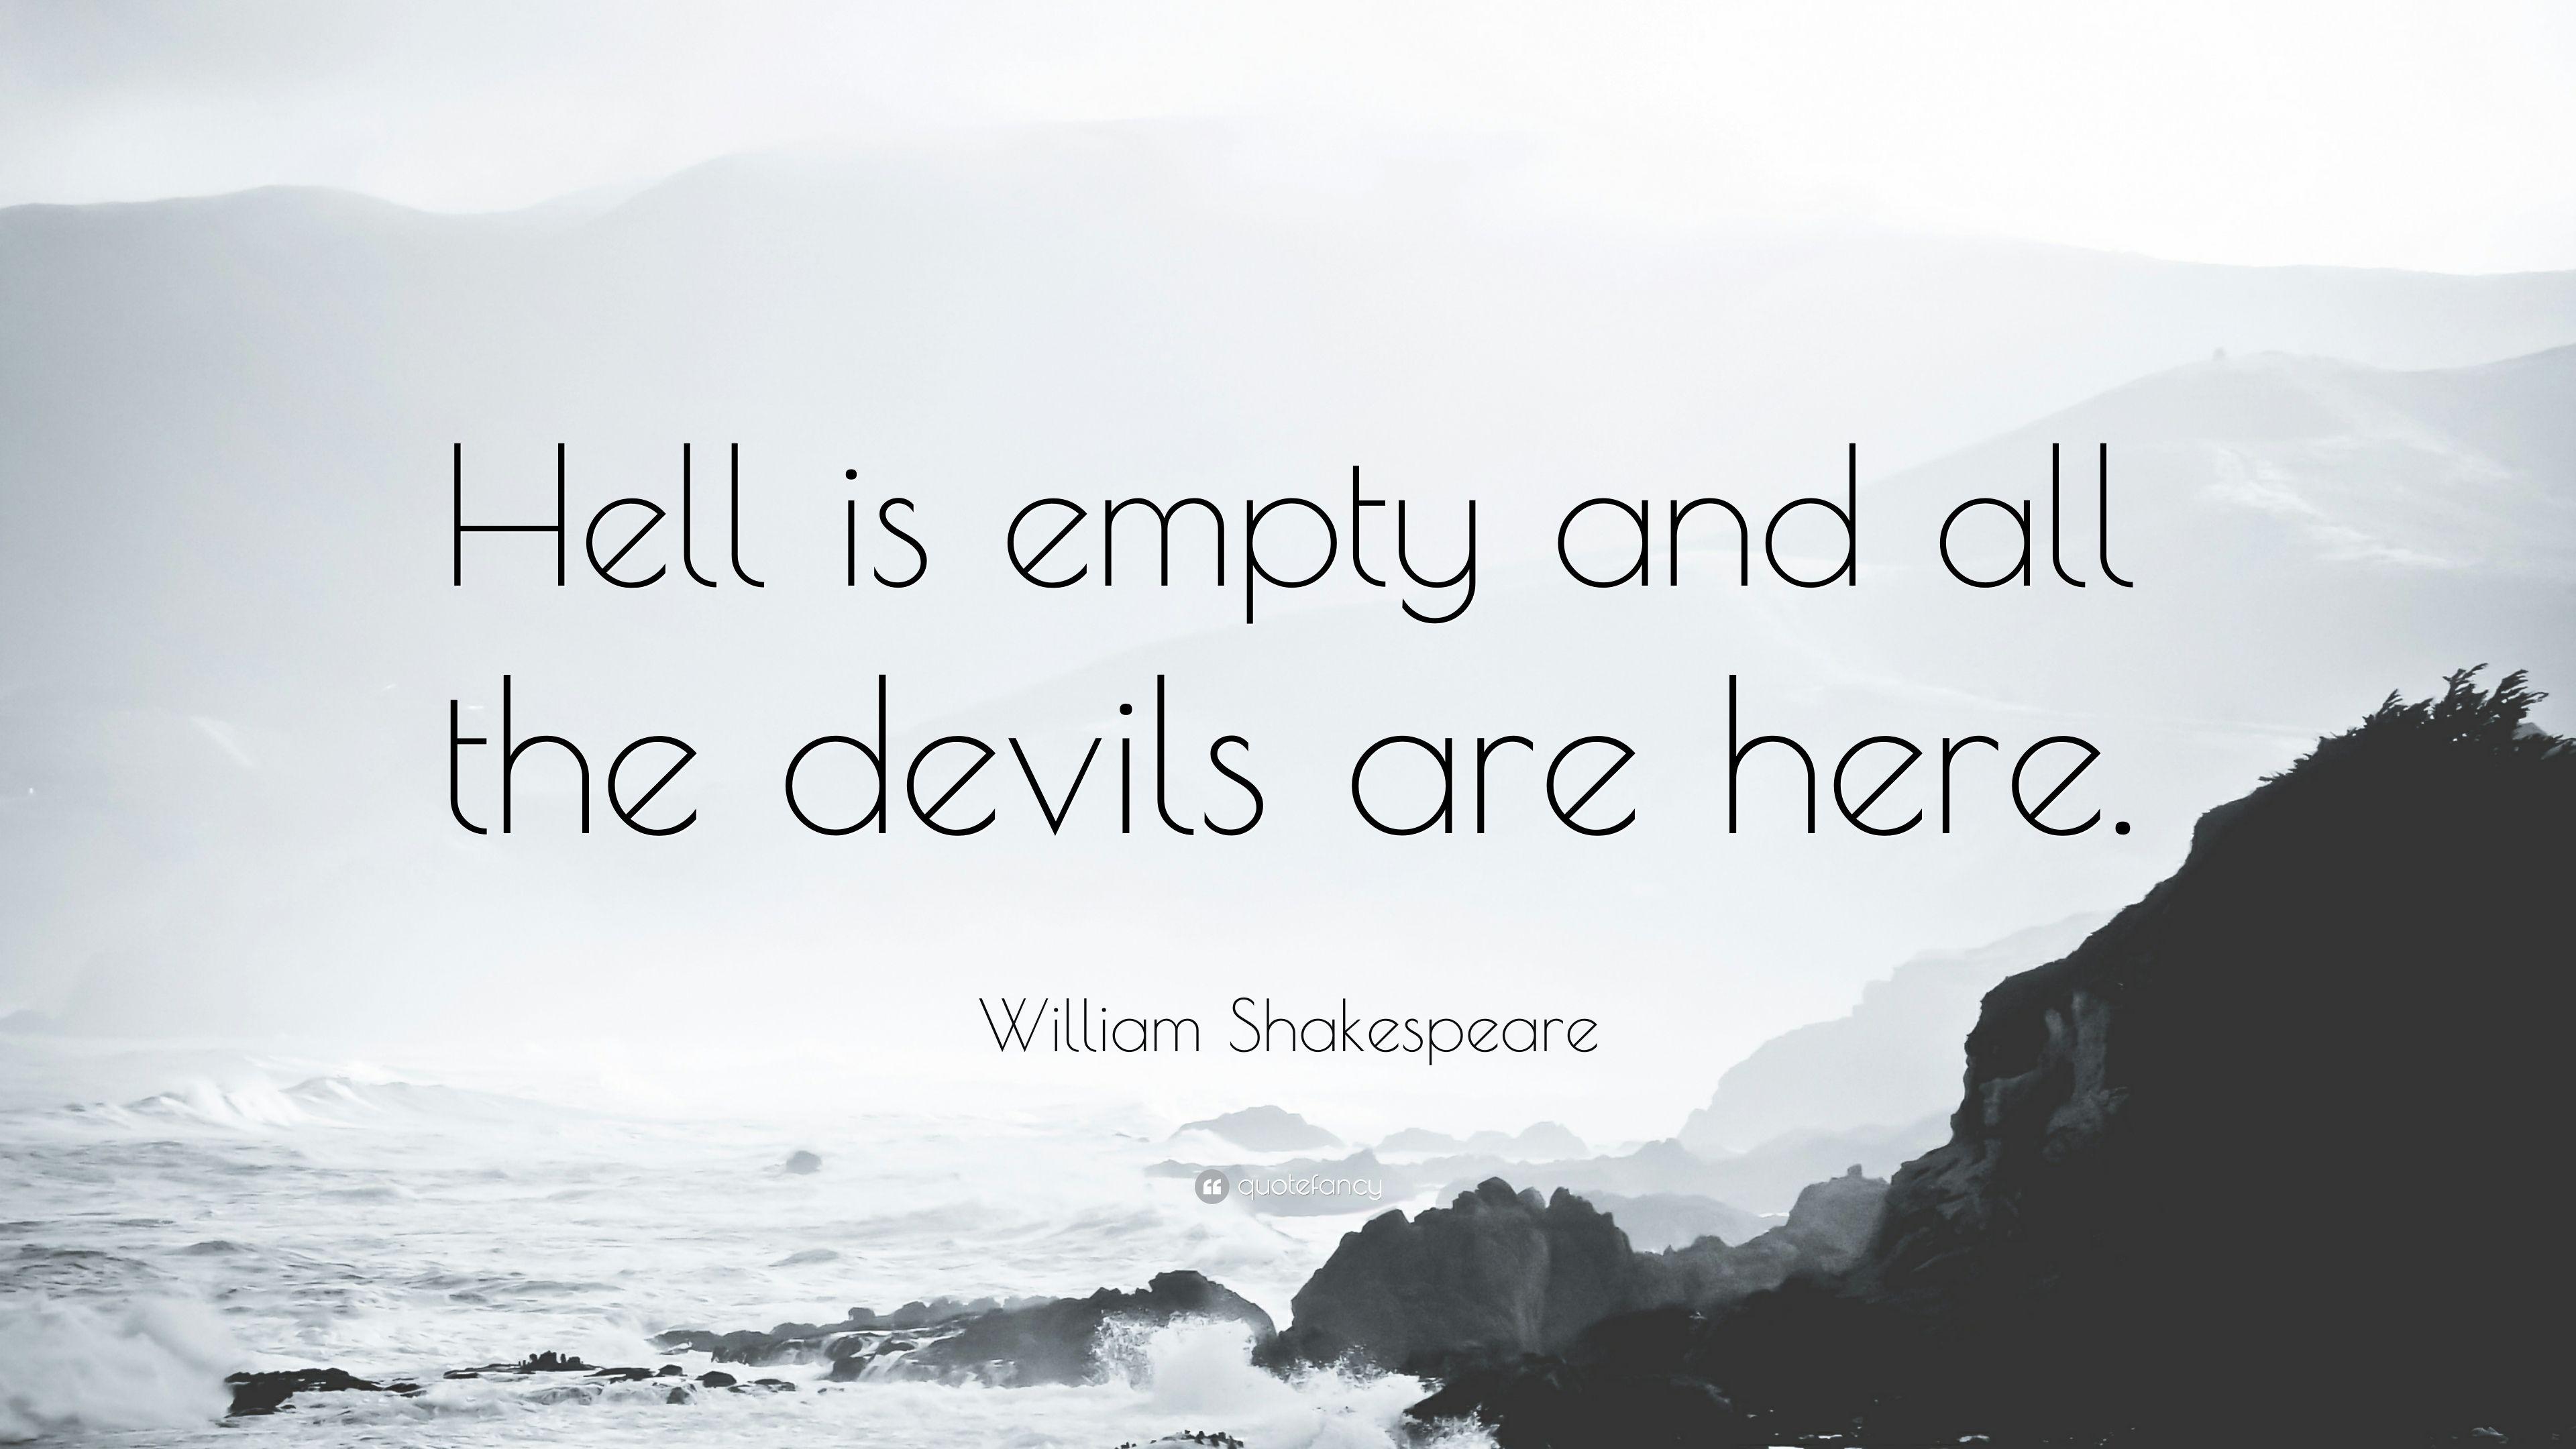 William Shakespeare Quote: “Hell is empty and all the devils are